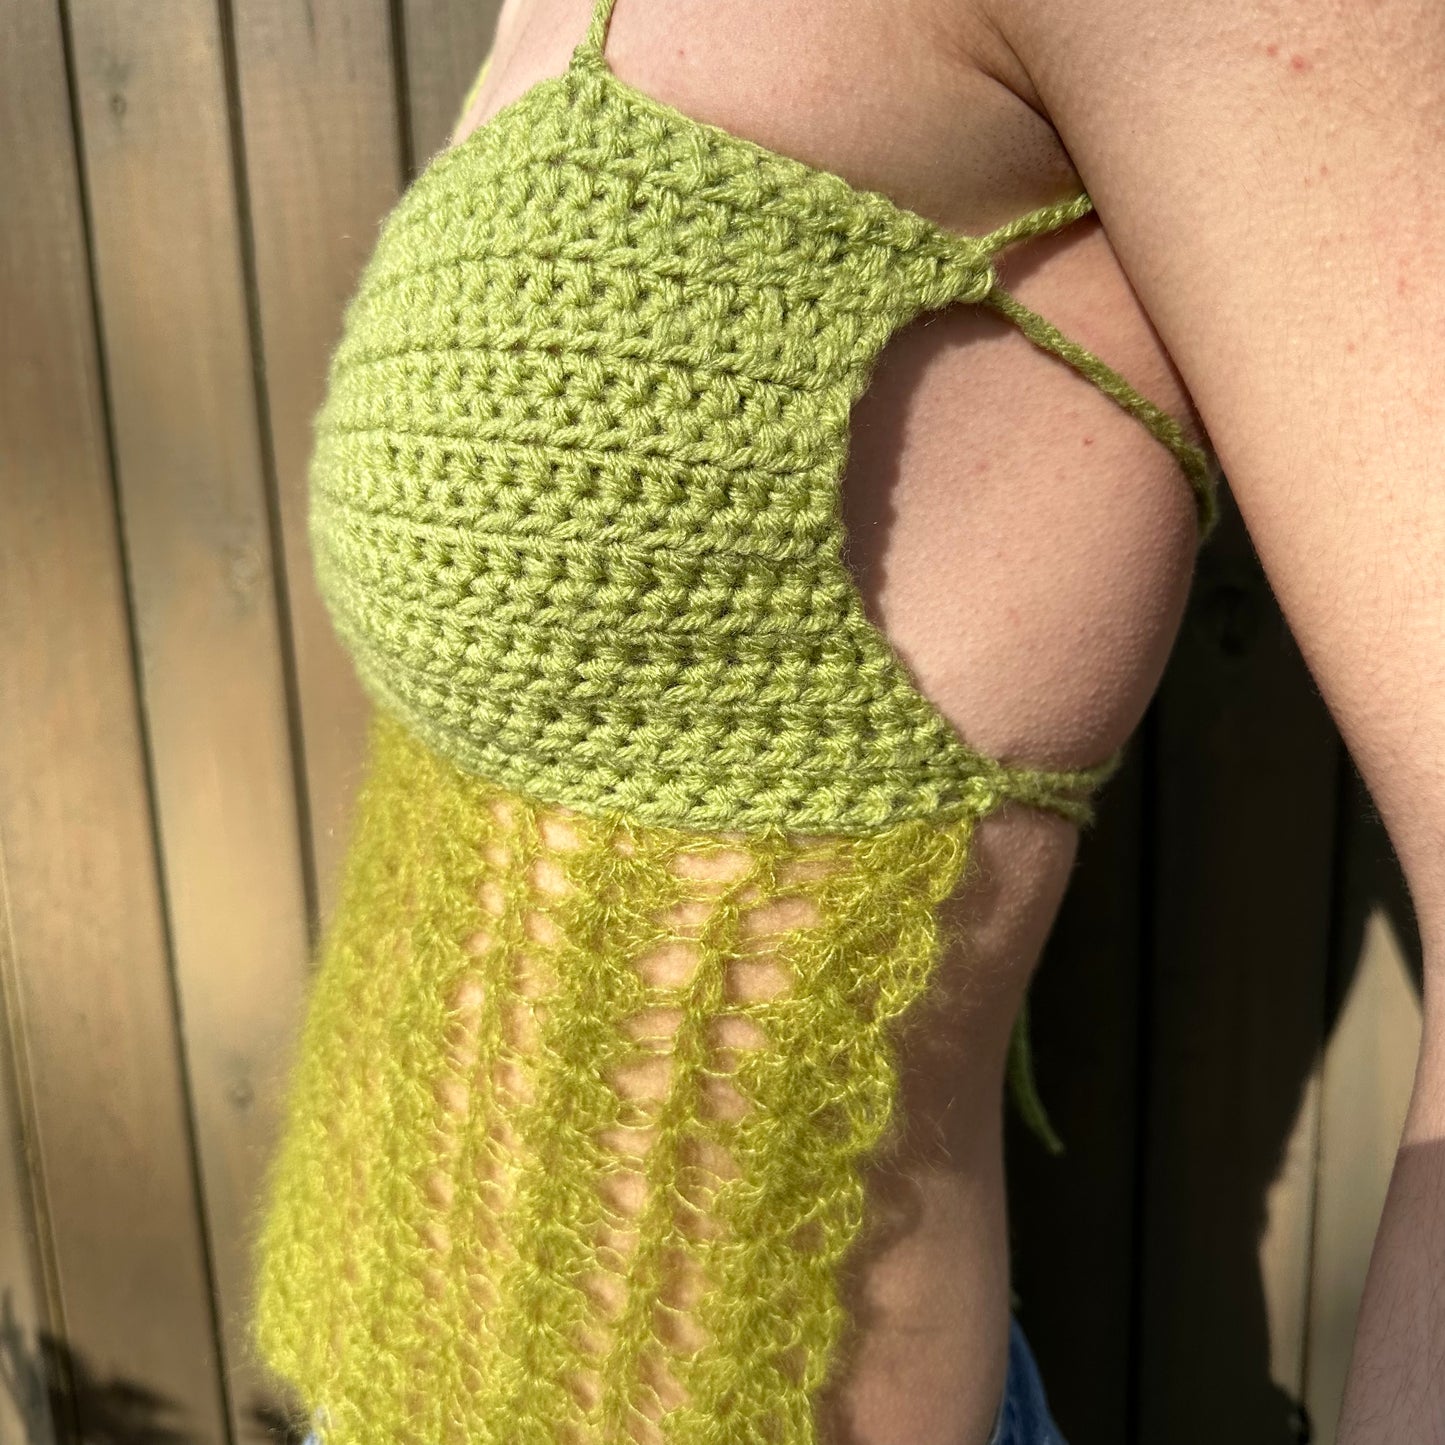 Handmade crochet mohair lace cami top in green